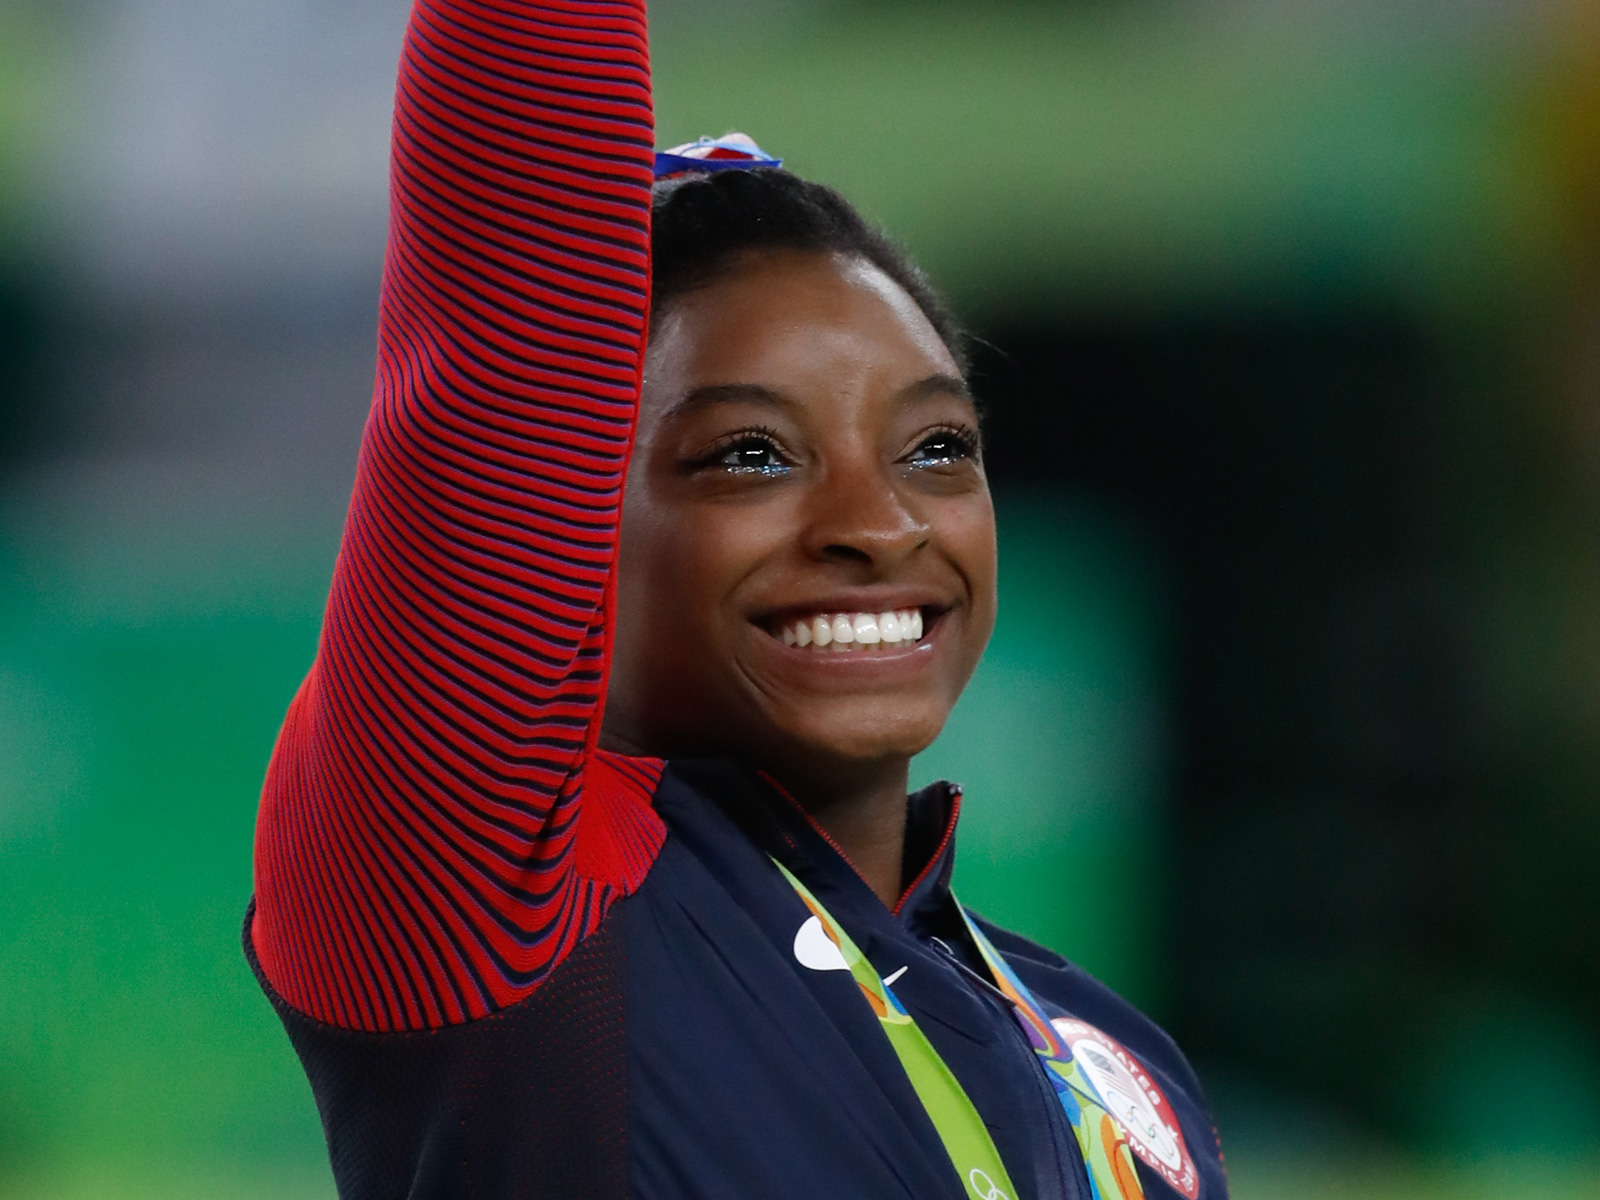 Simone Biles faced backlash, but mental health experts and